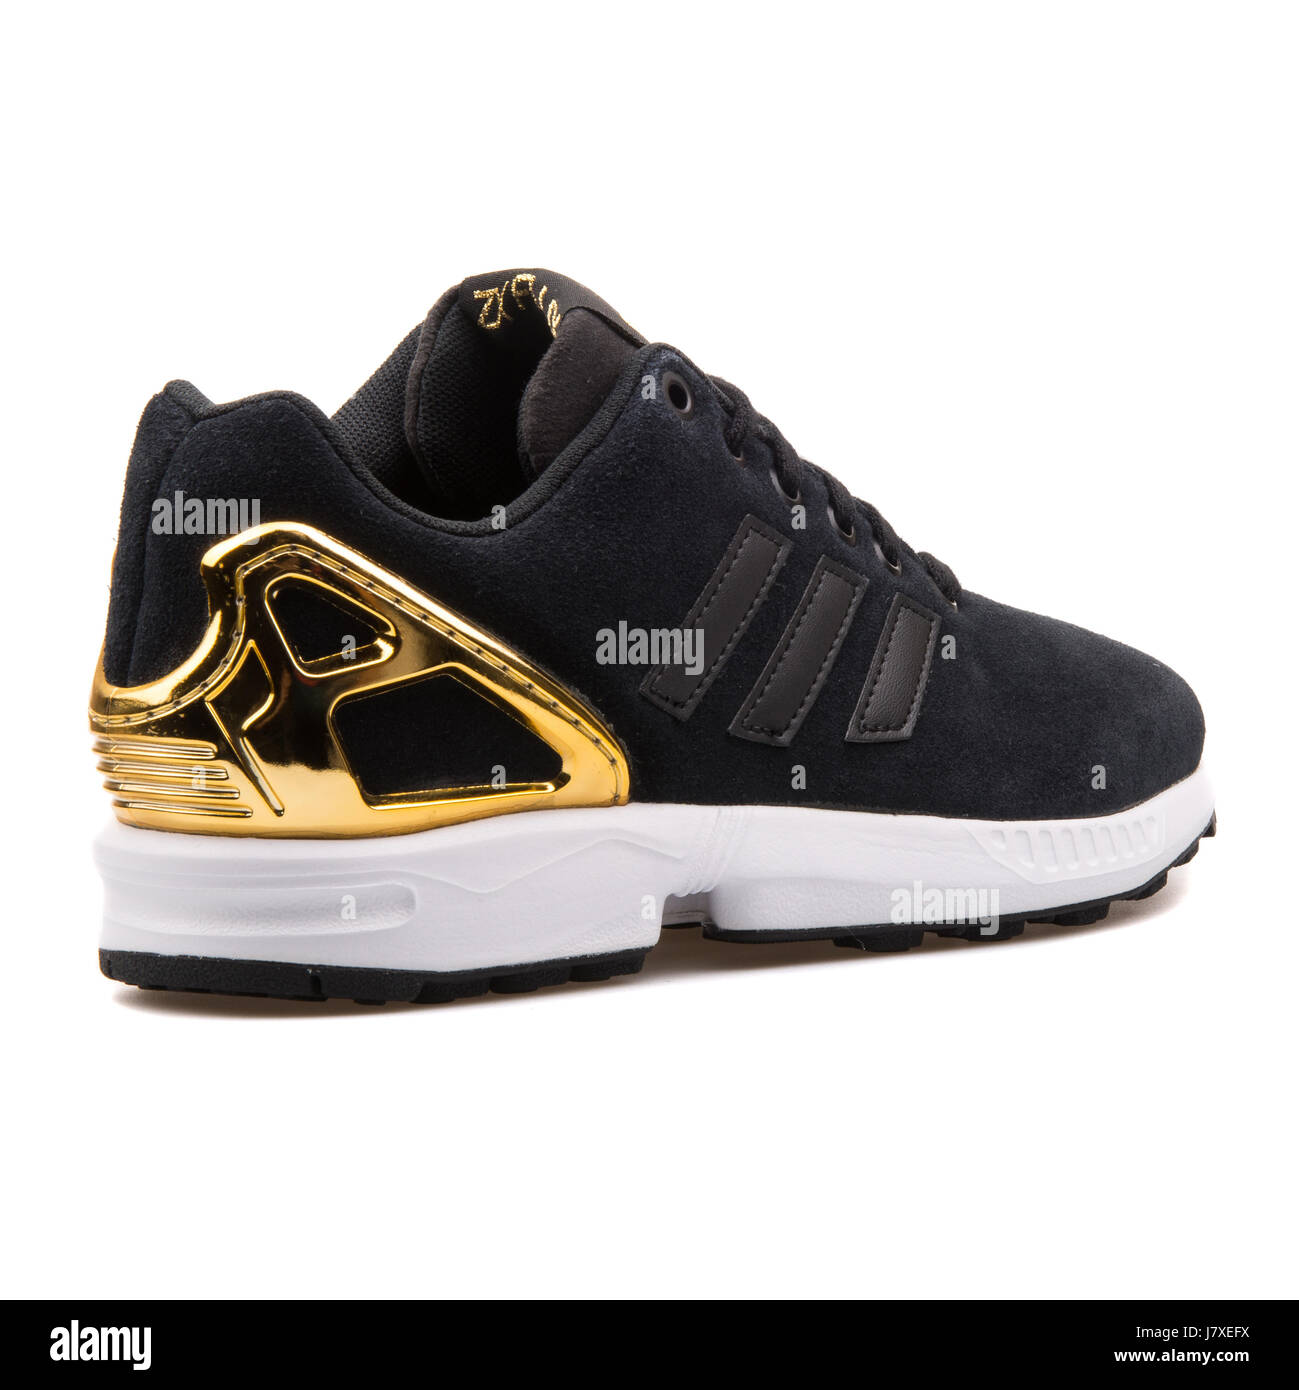 adidas zx flux gold edition